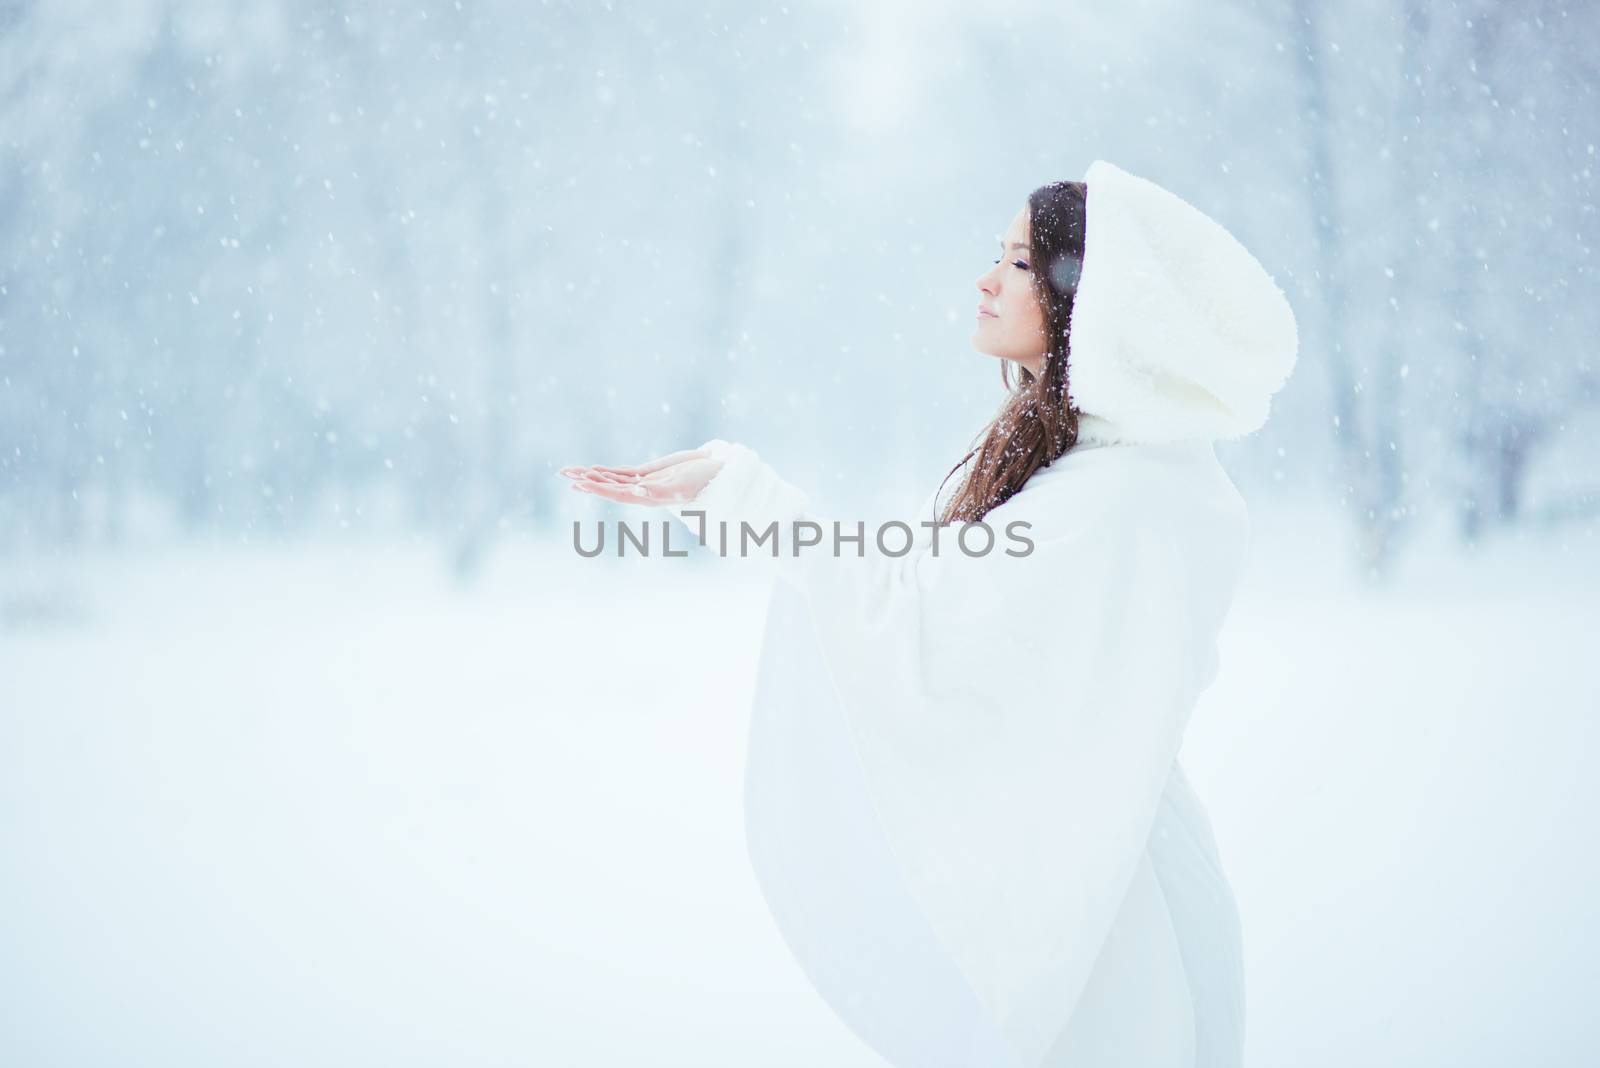 Girl alone in the snow, enjoying the tranquility and quietness of the snowfall